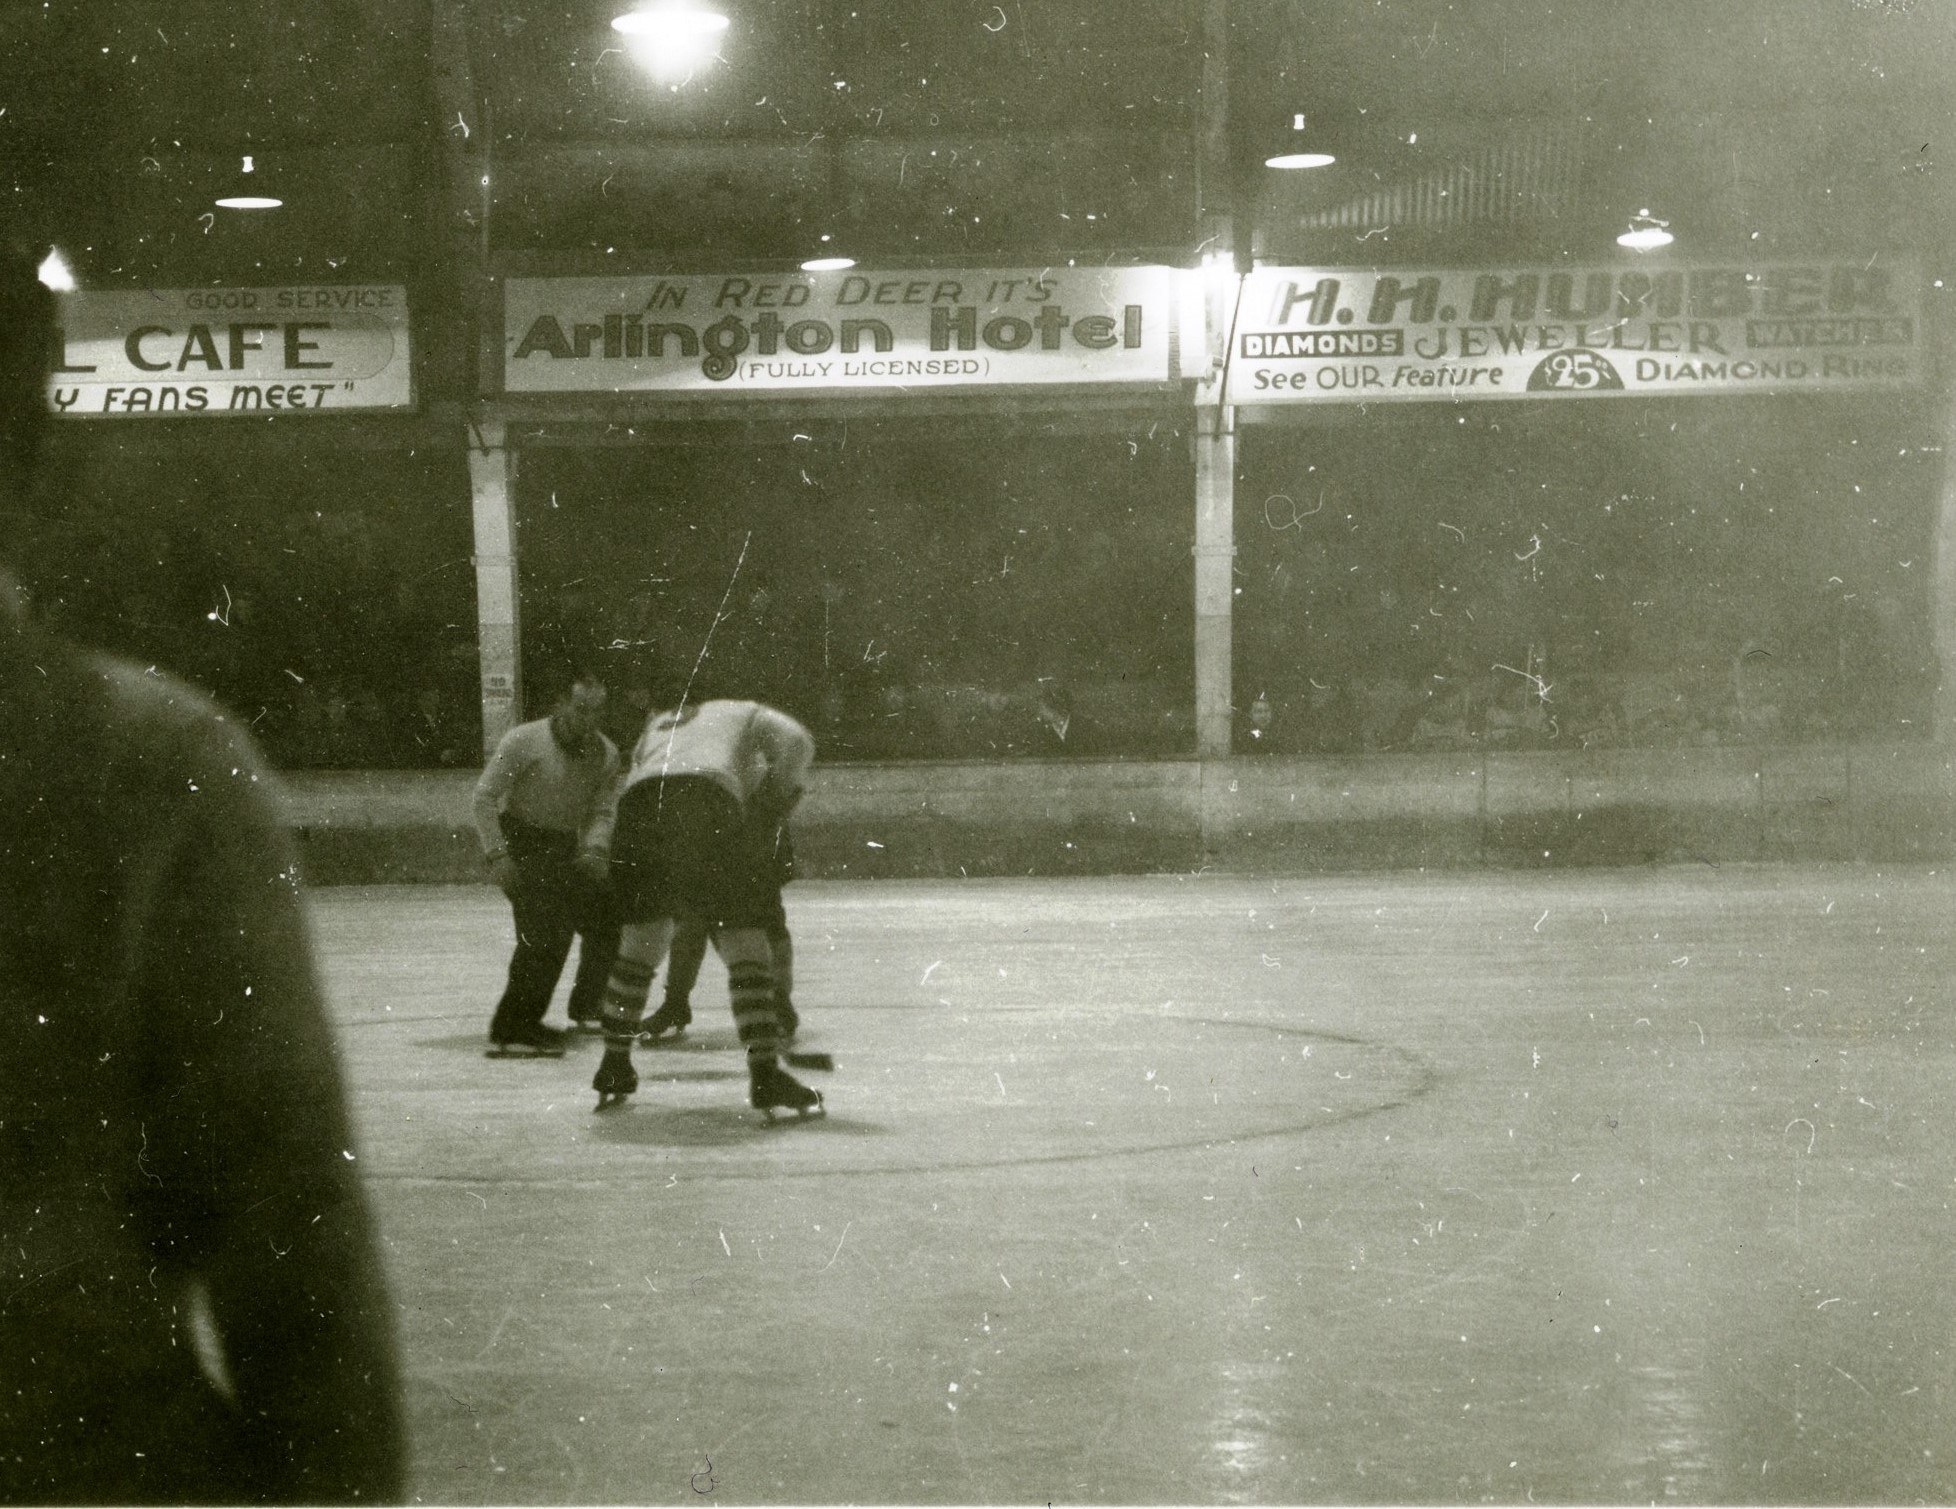 FOCUS - Face-off during a Red Deer vs. Lethbridge hockey game in the old Red Deer Arena on Ross Street